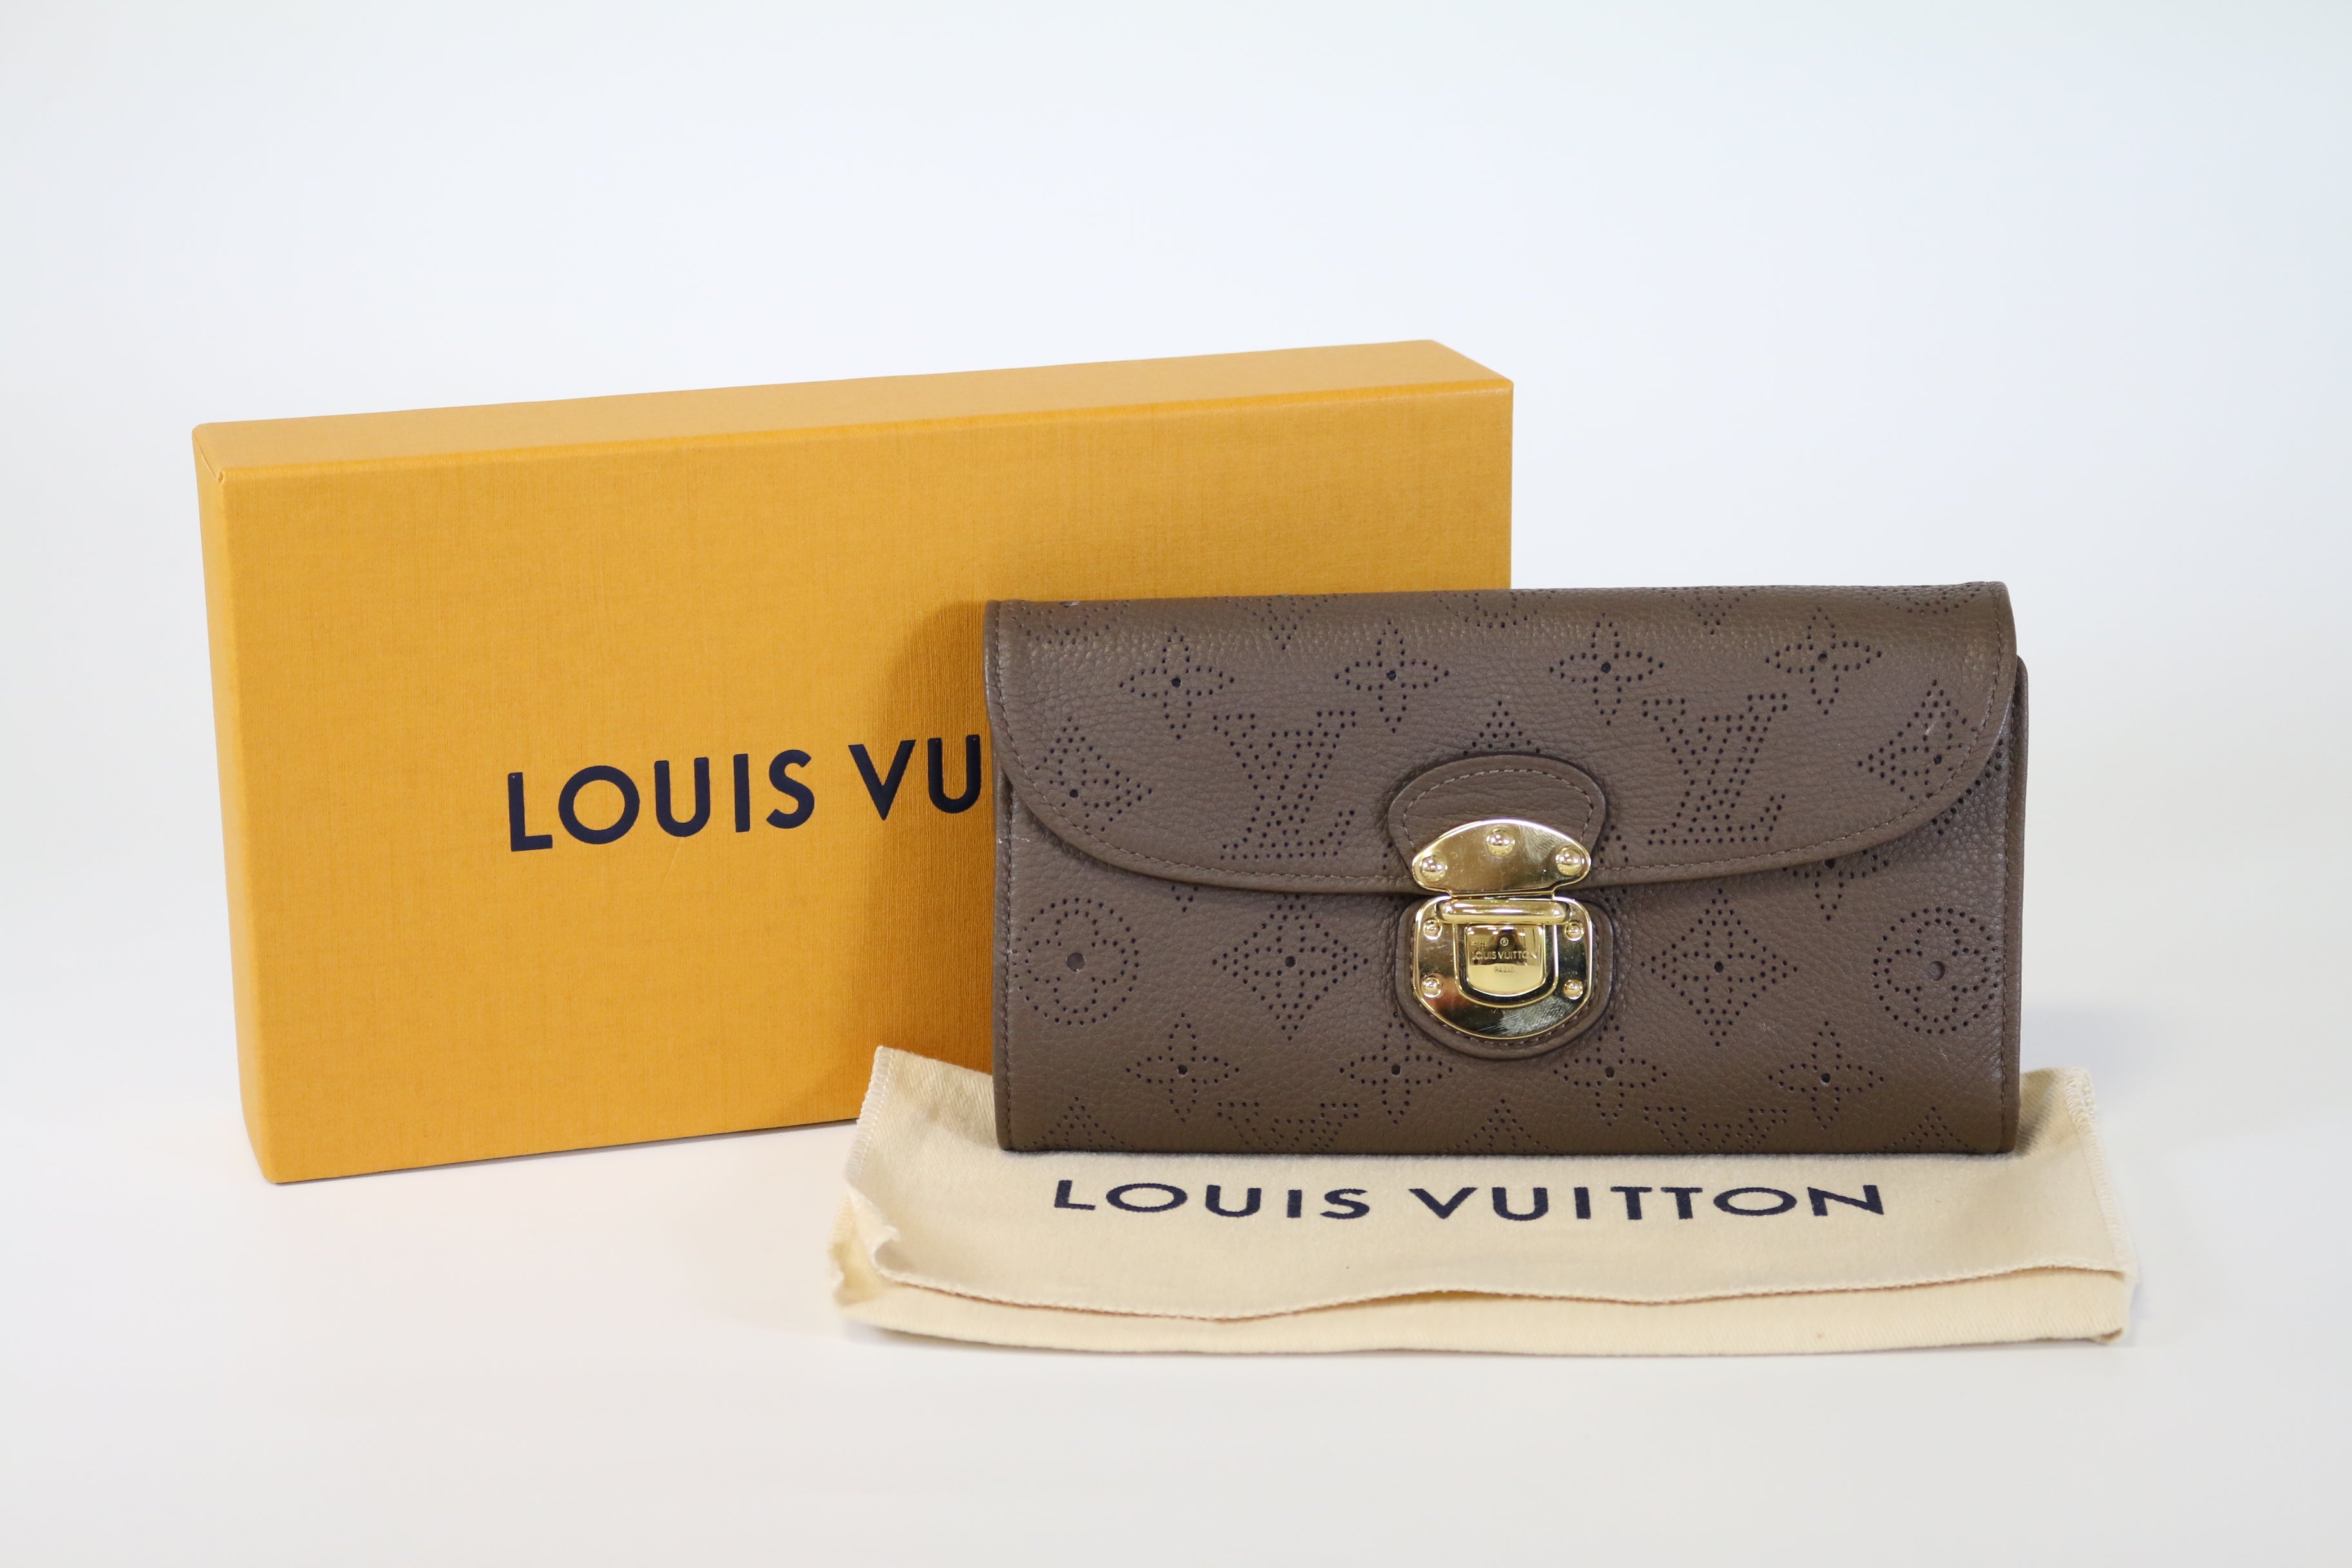 Authenticated Used LOUIS VUITTON Louis Vuitton Mahina Portefeuille